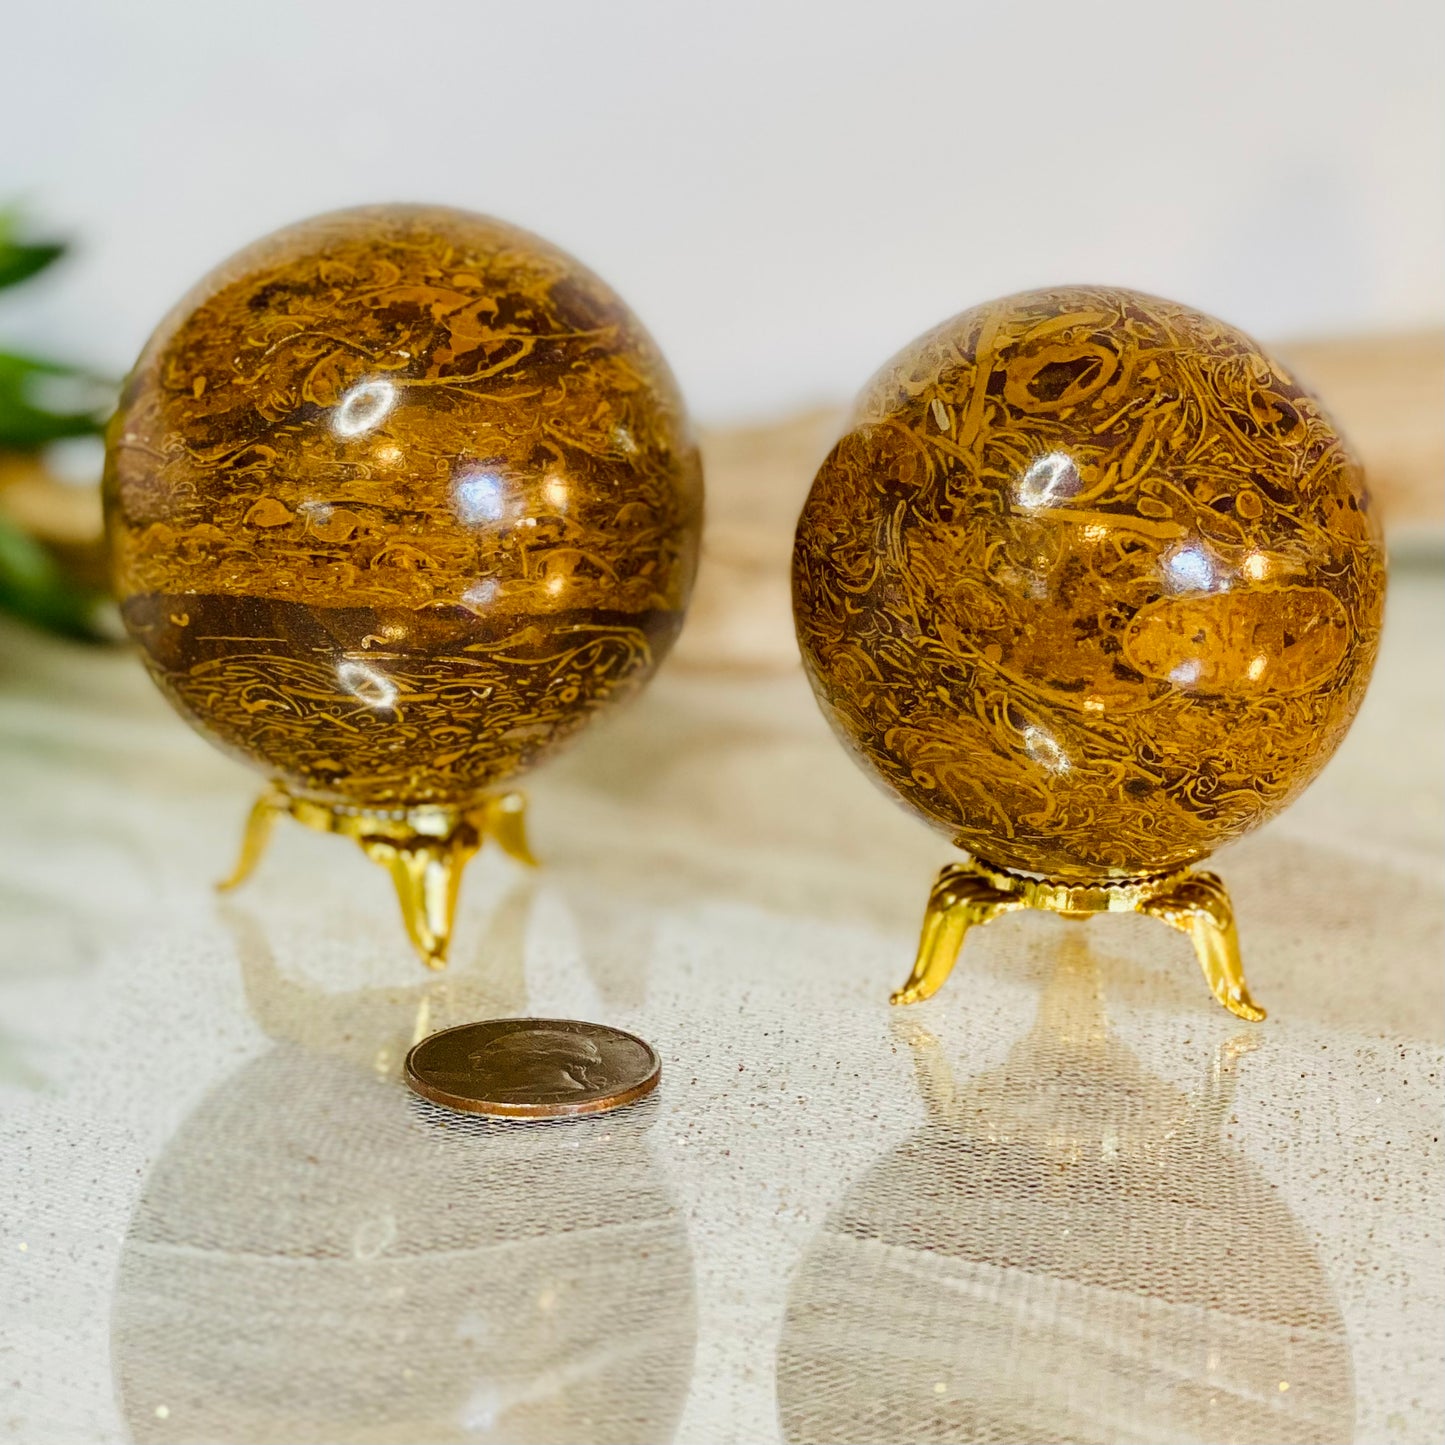 Arabic Writing Stone Spheres - Unique Collectible Crystal Spheres